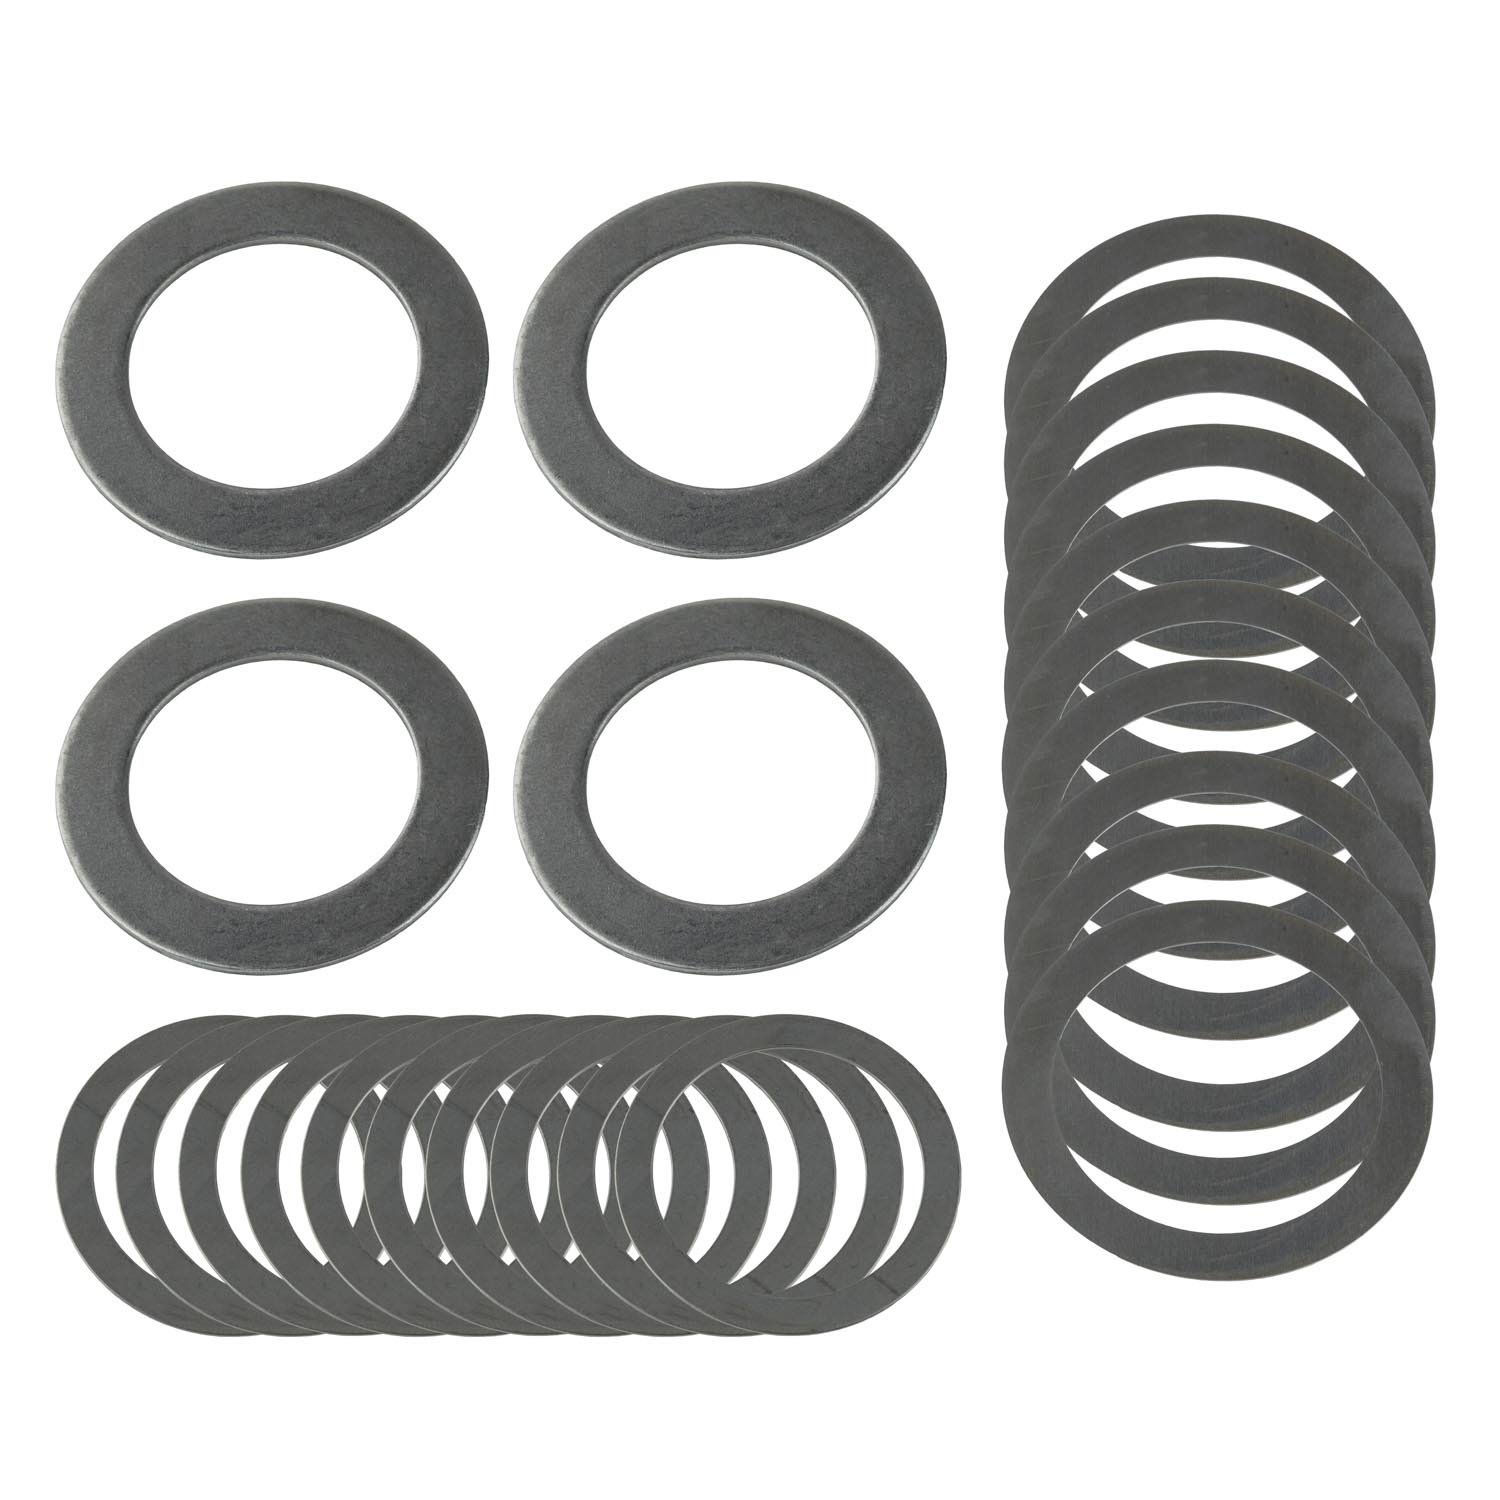 Carrier And Pinion Shim Kit for 1963-1979 Chevy Corvette, Ford 8.8 in., GM 8 in., 8.5/8.625 in., 8.875 in. Car